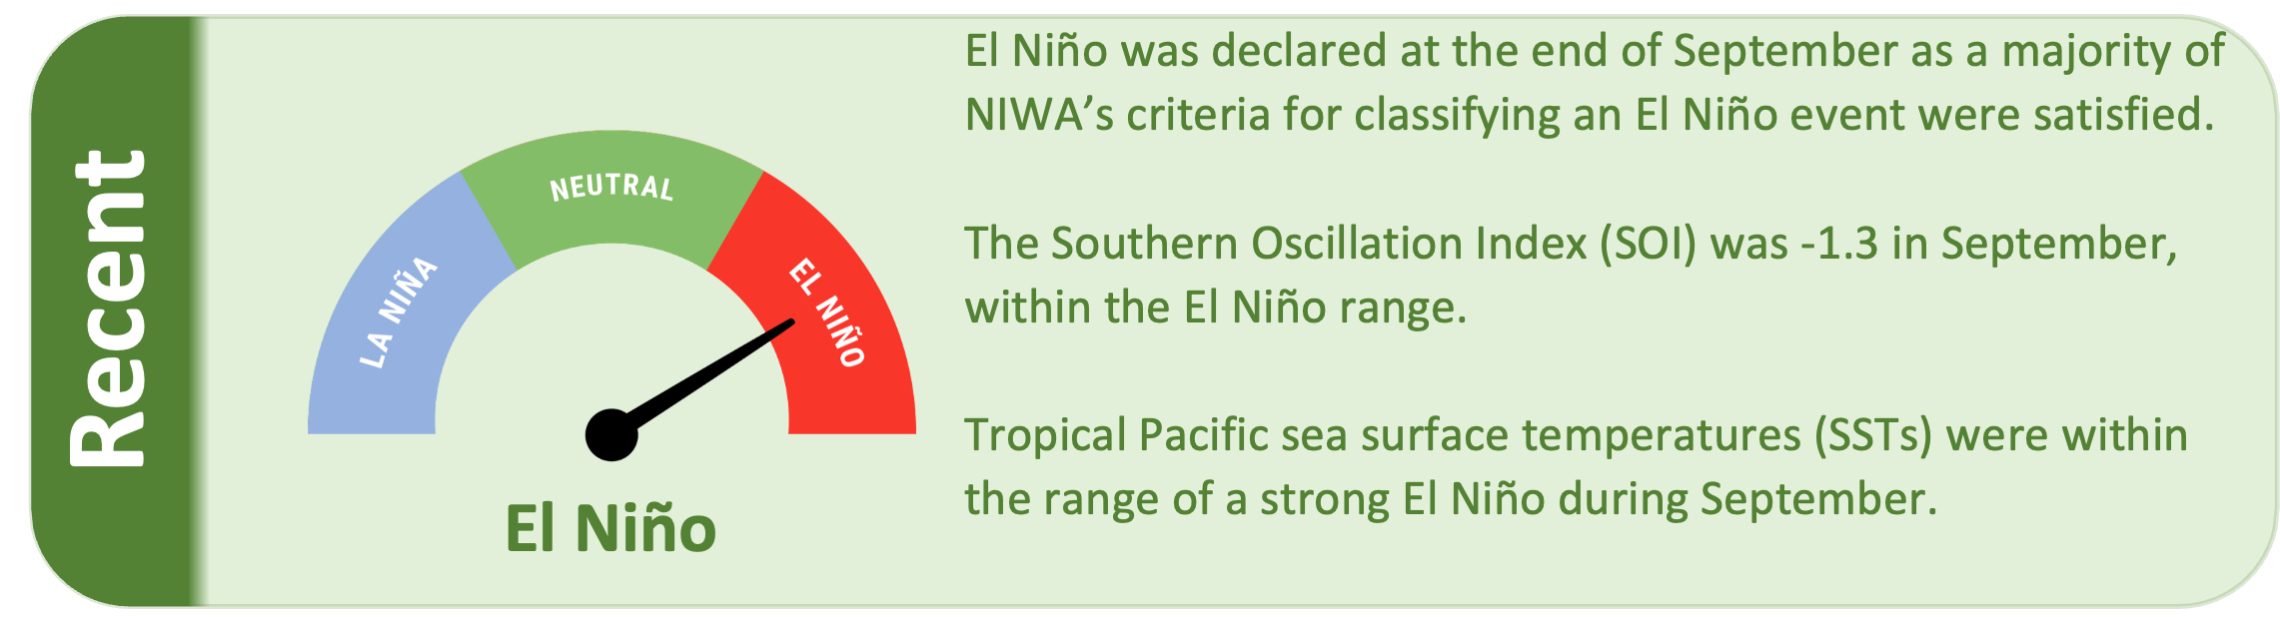 Recent ICU news - El Niño declared at the end of September